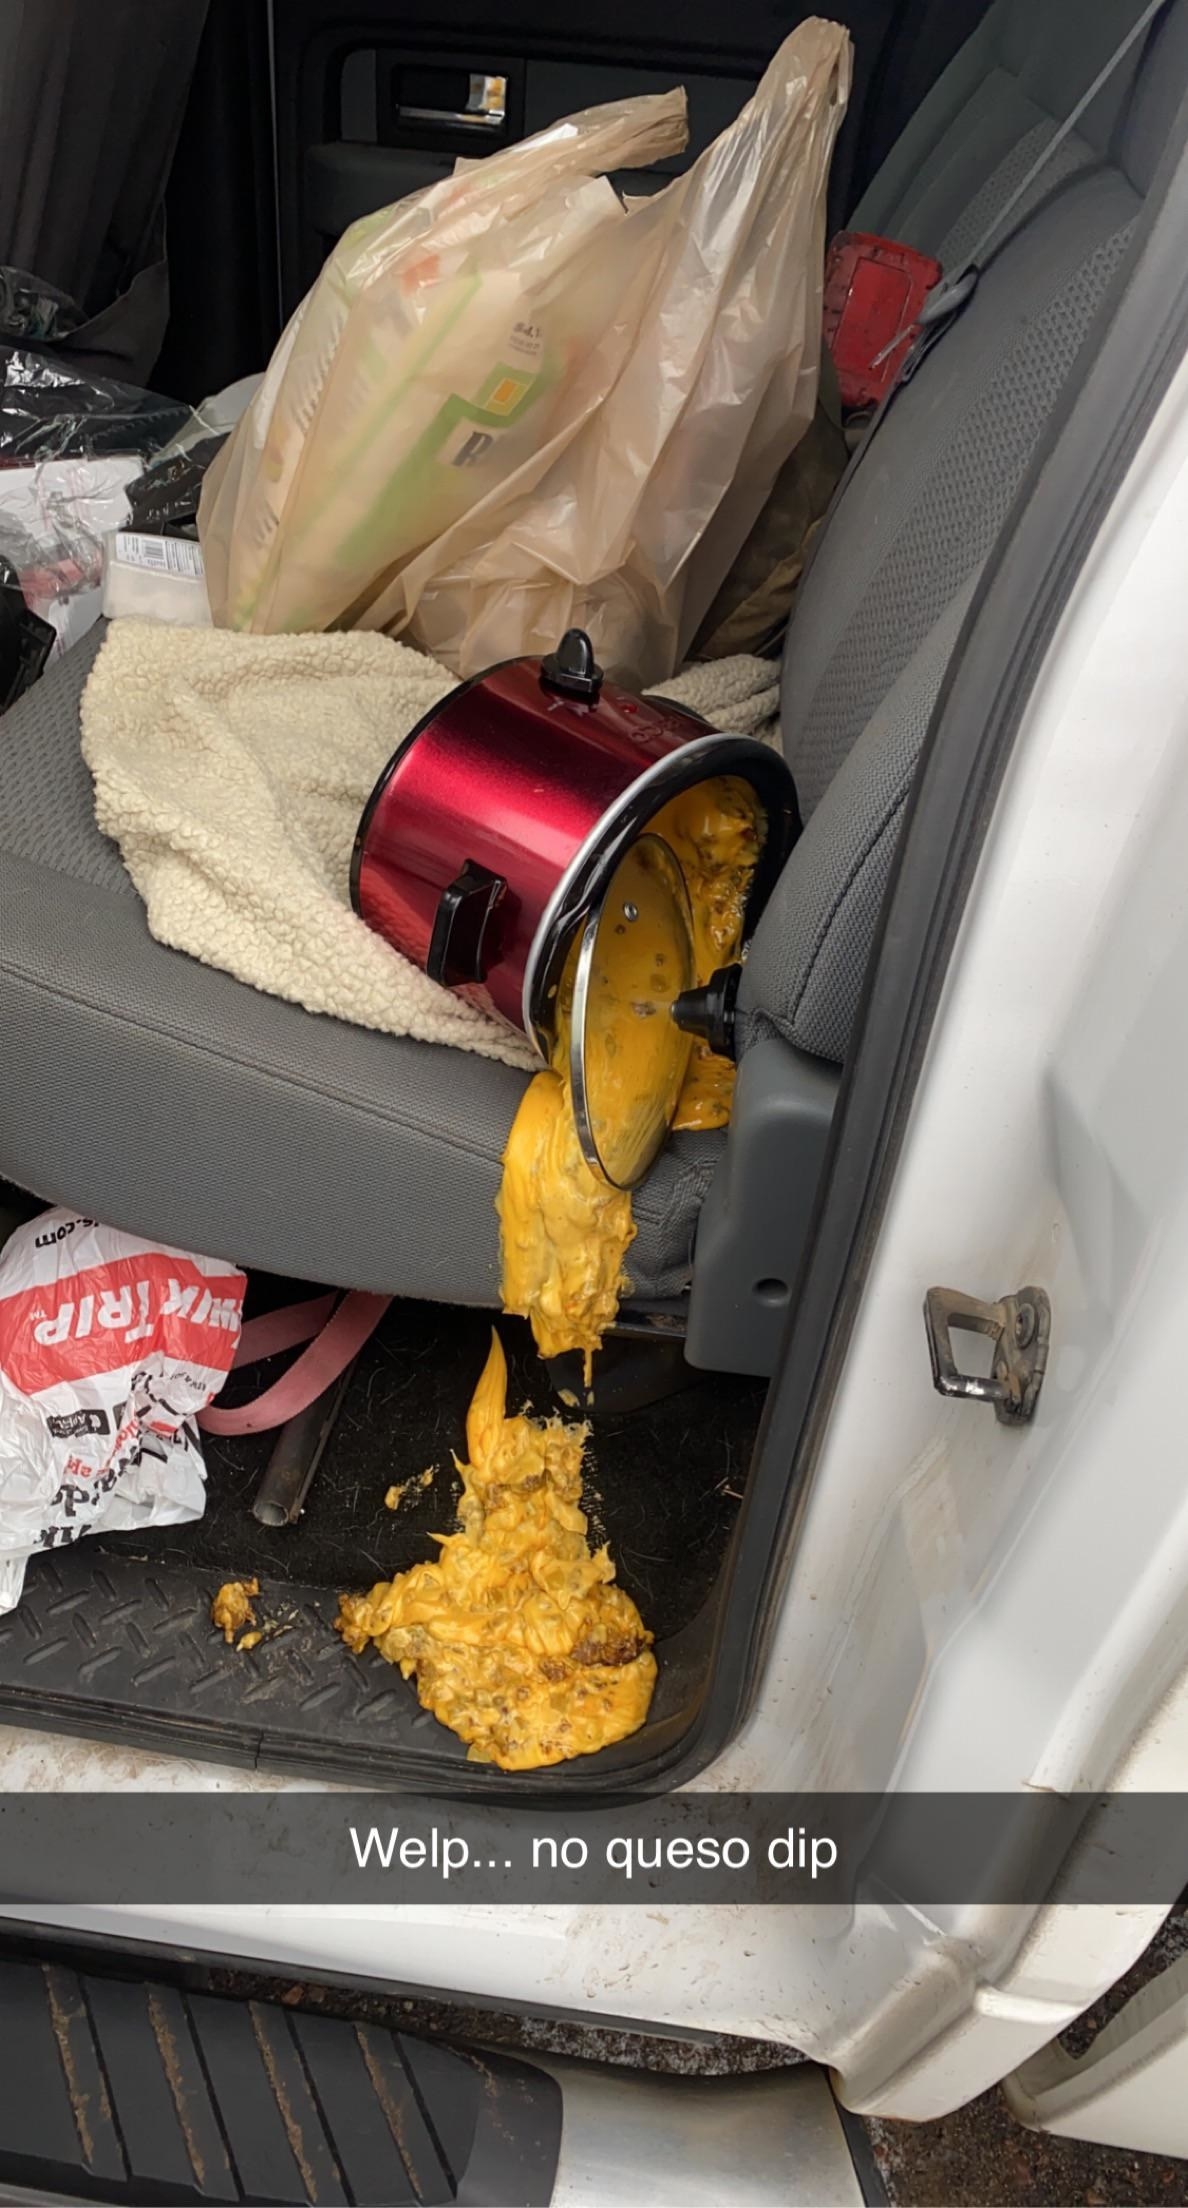 A pot of queso dip spilled in a car